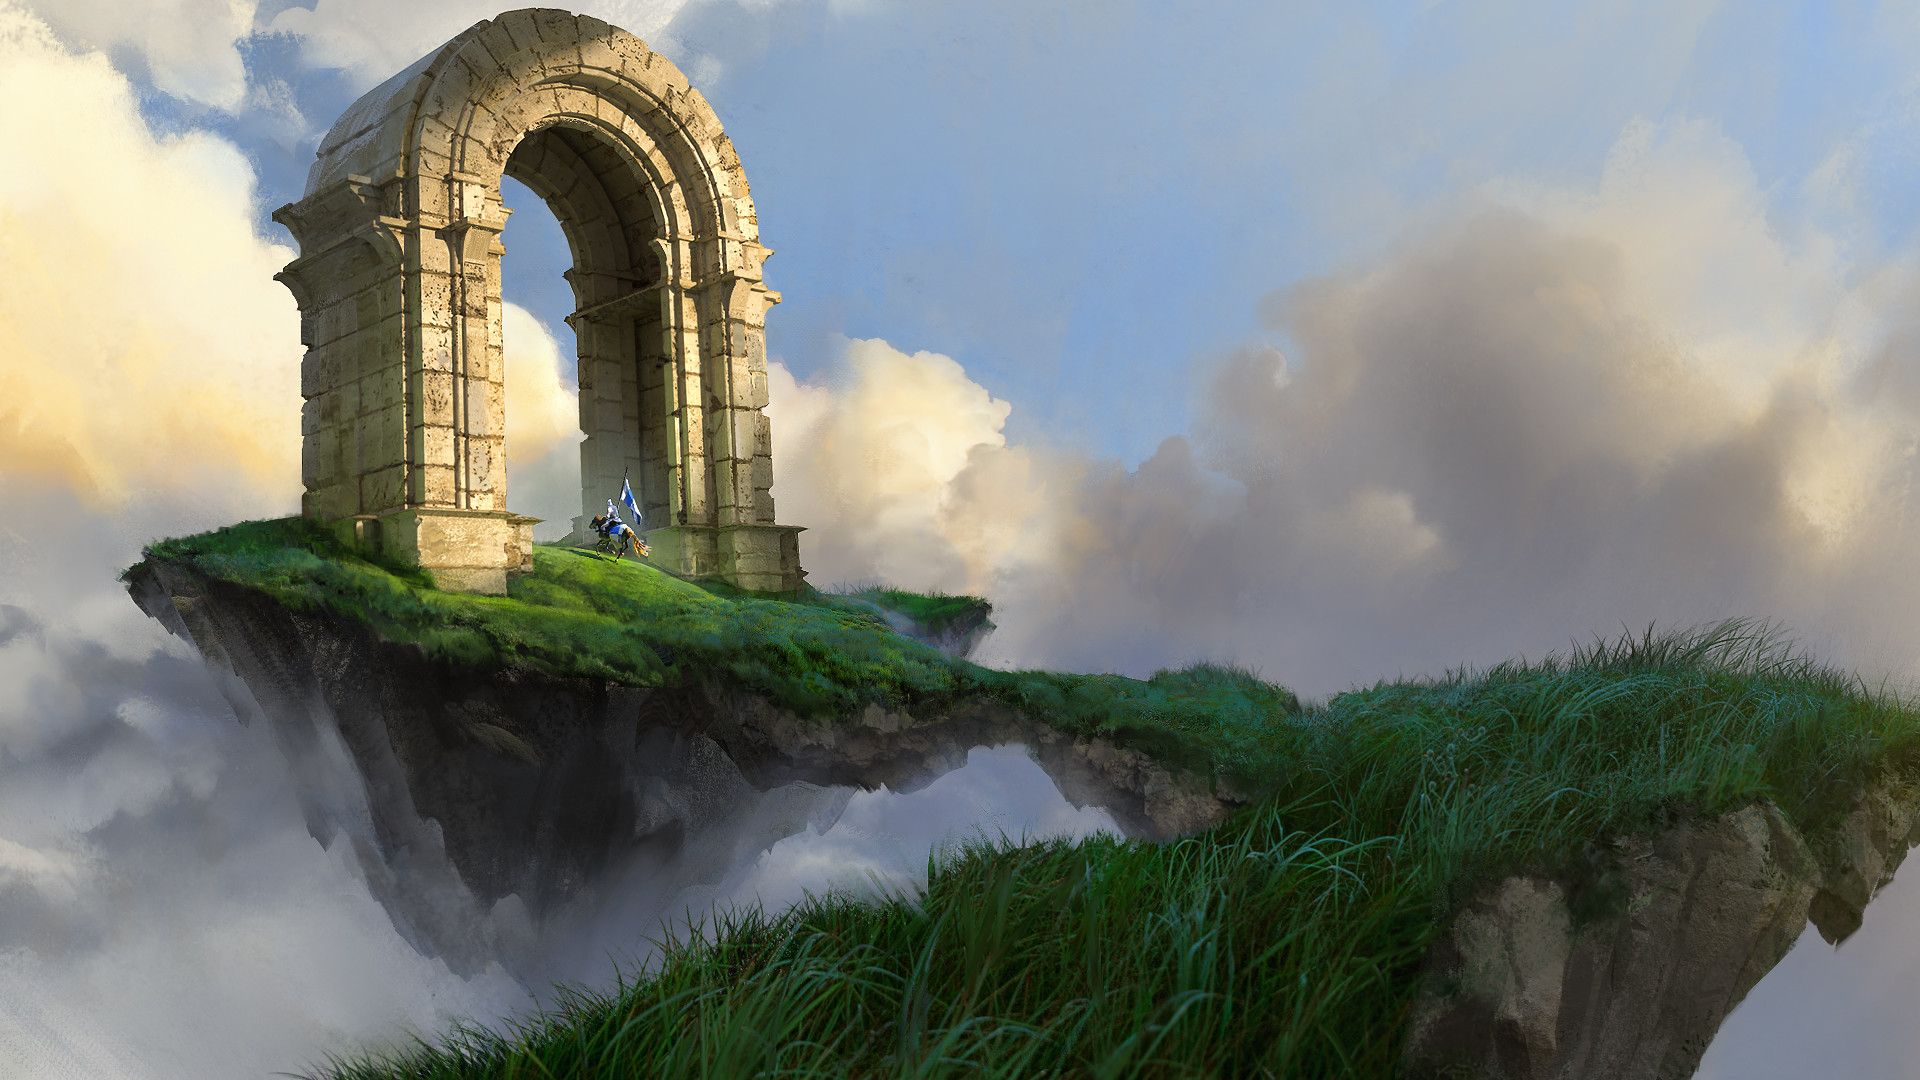 knight, Floating island, Arch, Clouds, Flag, Horse Wallpaper